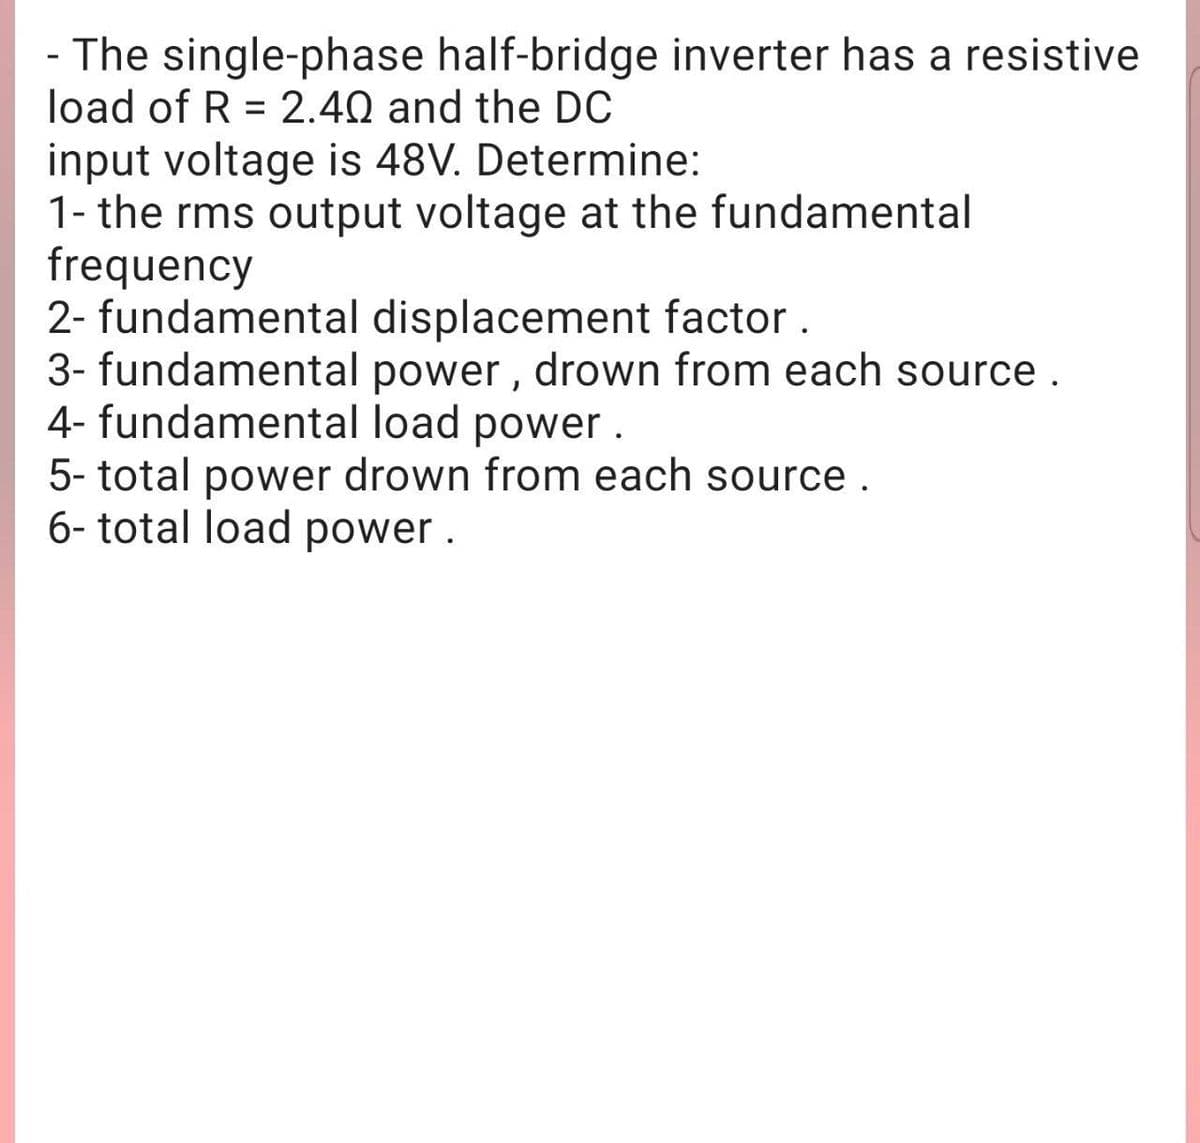 - The single-phase half-bridge inverter has a resistive
load of R = 2.40 and the DC
input voltage is 48V. Determine:
1- the rms output voltage at the fundamental
frequency
2- fundamental displacement factor.
3- fundamental power, drown from each source .
4- fundamental load power.
5- total power drown from each source .
6- total load power.
%3D
